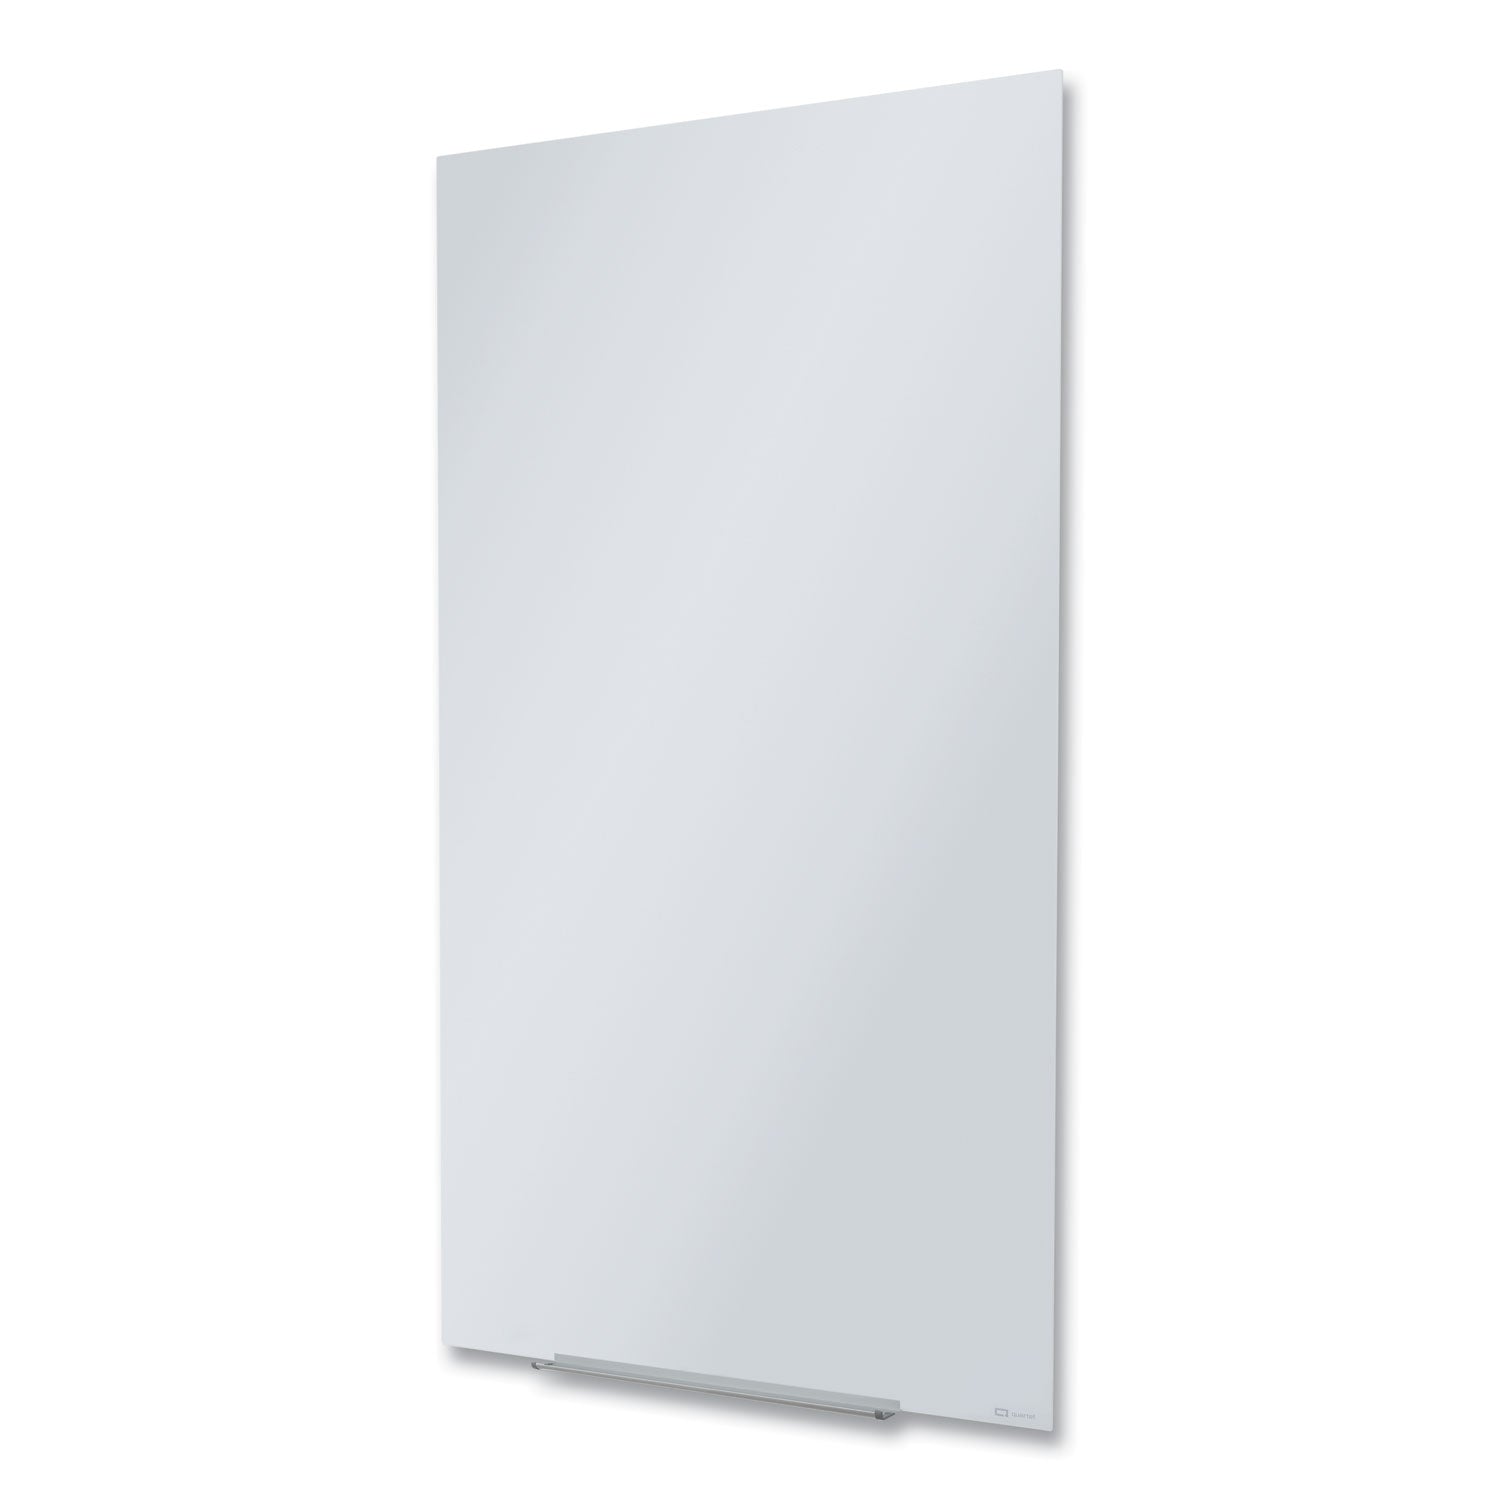 invisamount-vertical-magnetic-glass-dry-erase-boards-28-x-50-white-surface_qrtq012850imw - 2